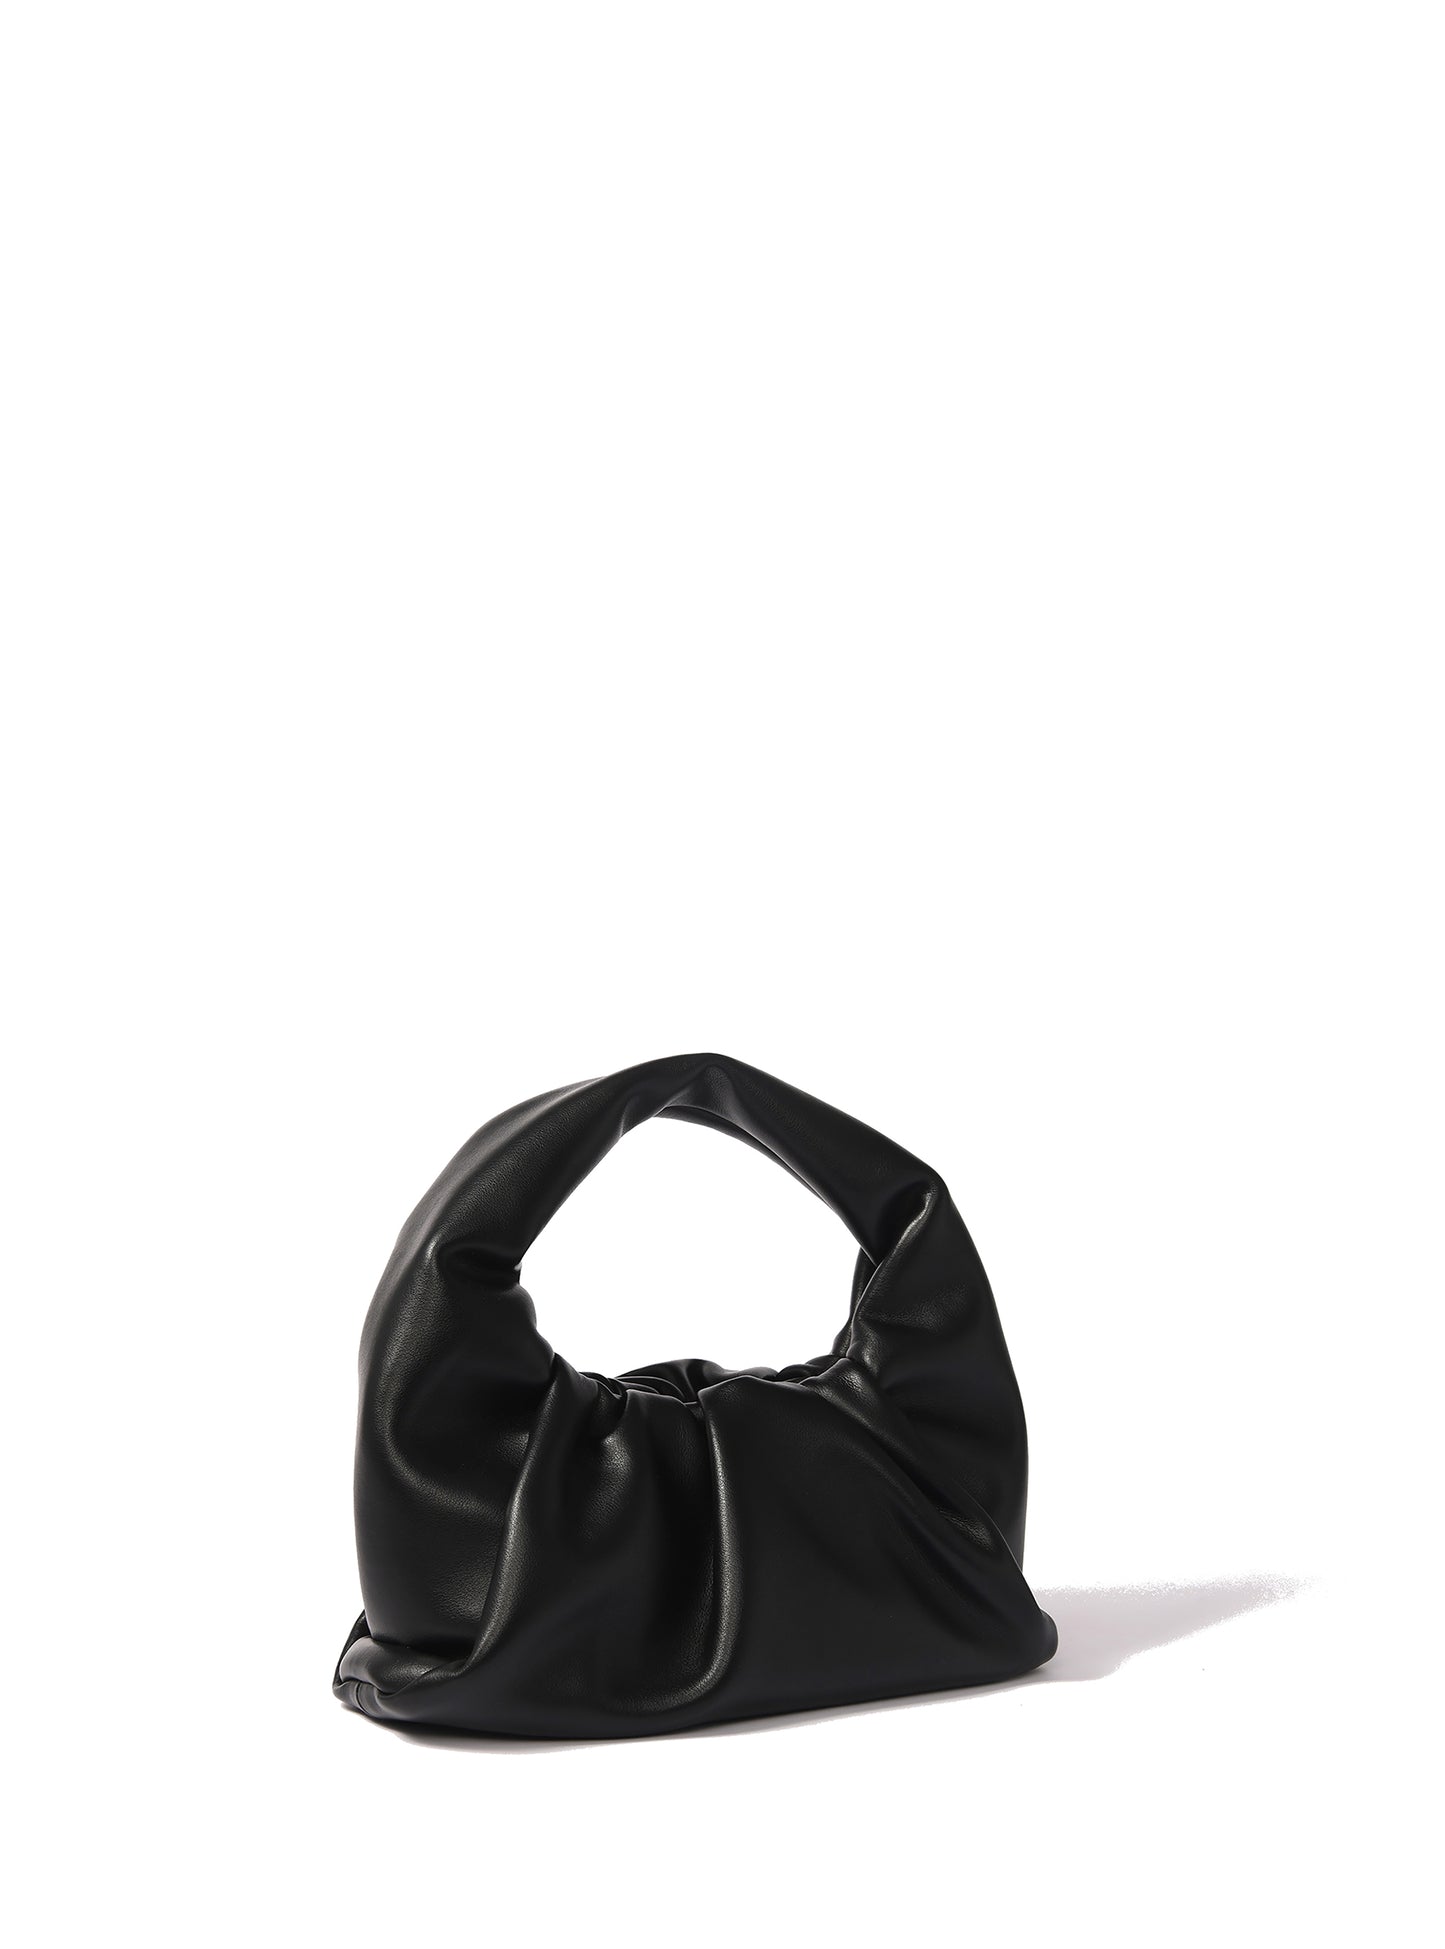 Marshmallow Croissant Bag in Soft Leather, Black